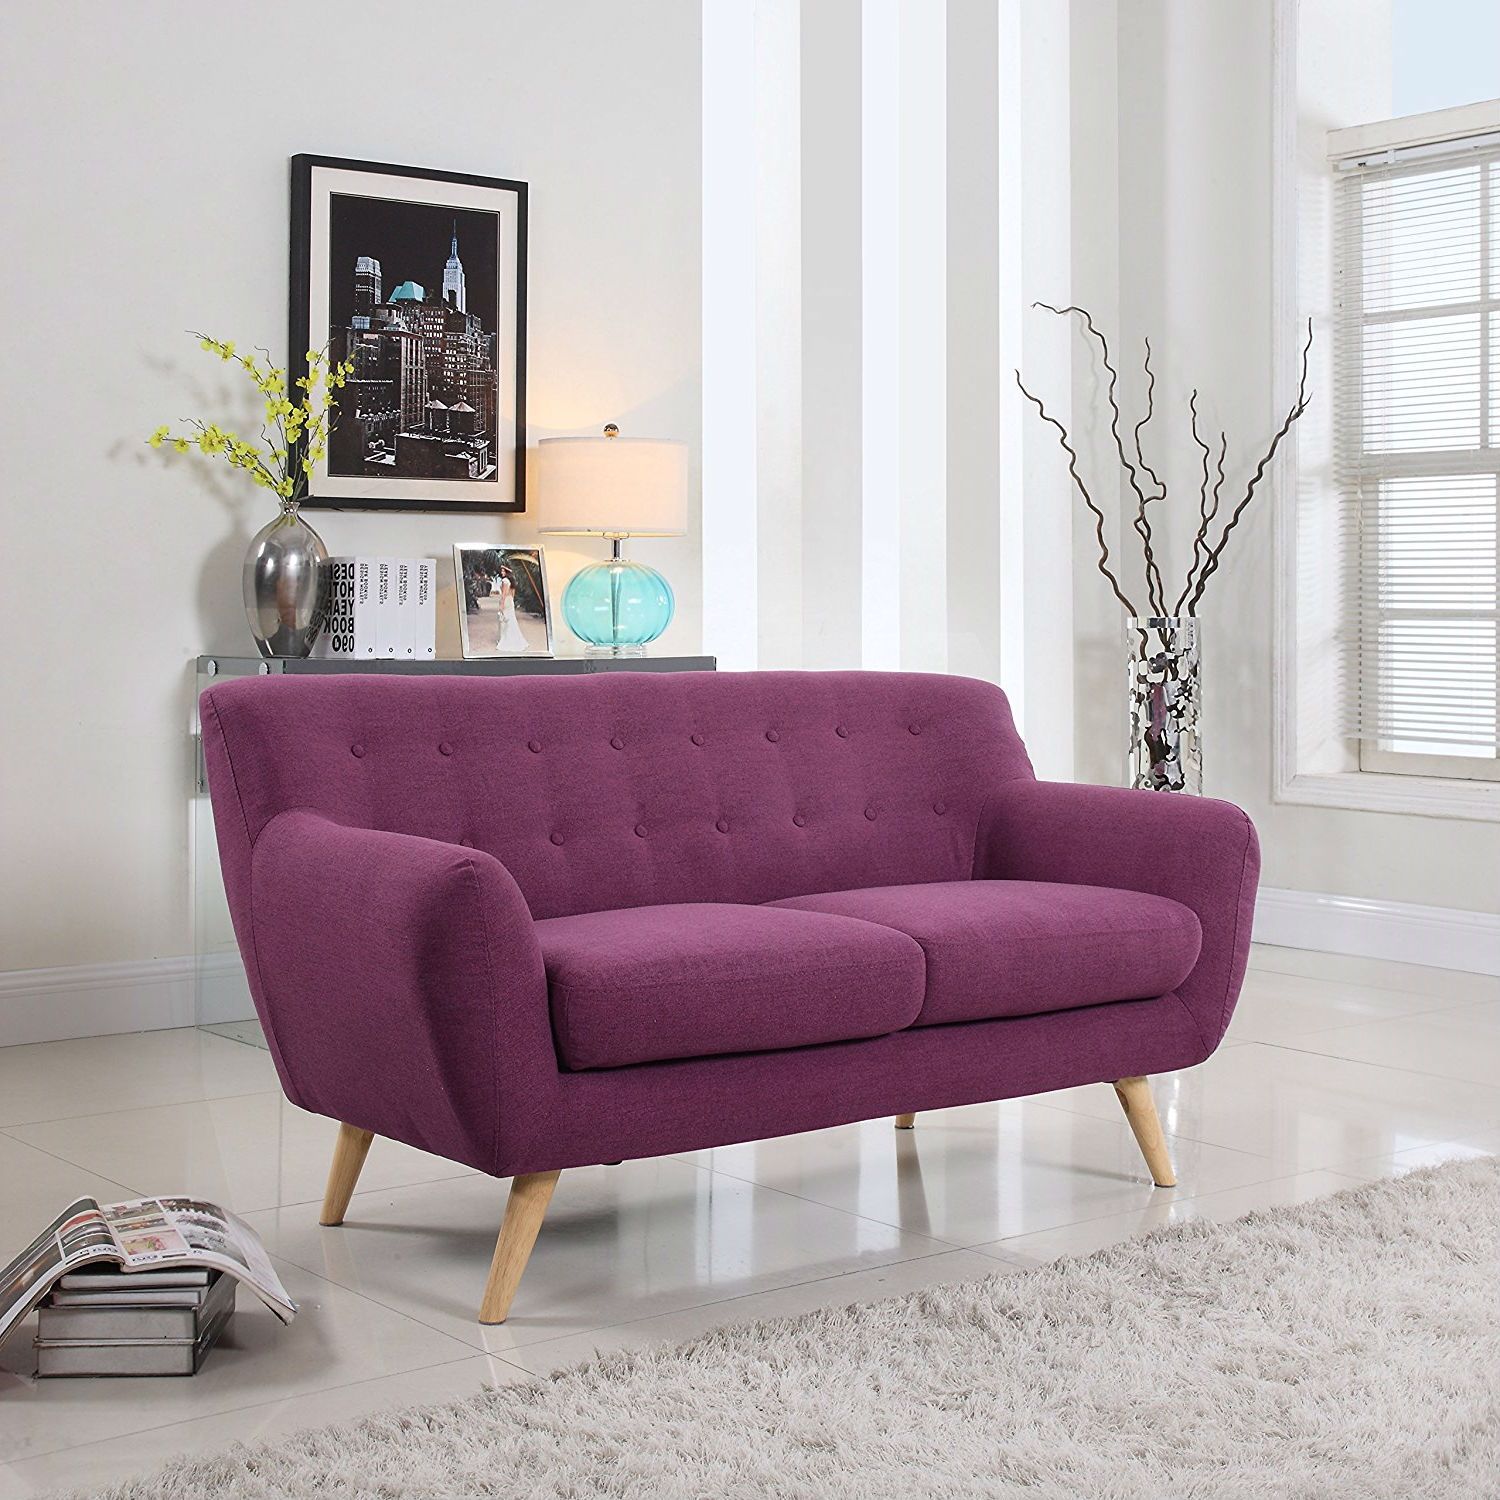 Modern Purple Linen Fabric Upholstered Mid Century Style Regarding Mireille Modern And Contemporary Fabric Upholstered Sectional Sofas (View 9 of 15)